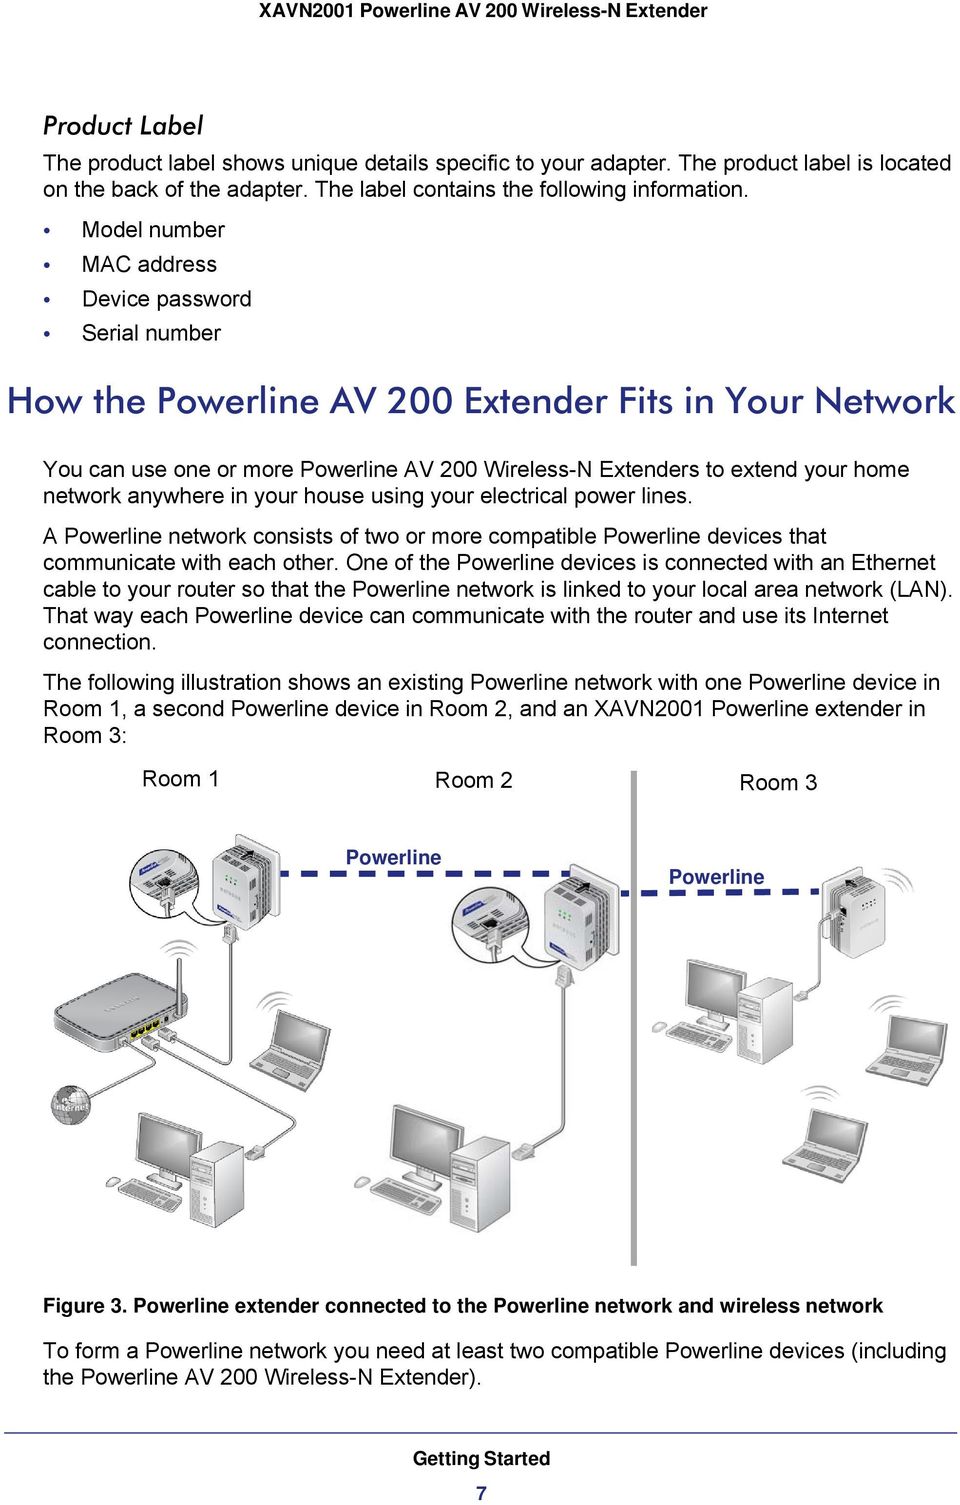 anywhere in your house using your electrical power lines. A Powerline network consists of two or more compatible Powerline devices that communicate with each other.